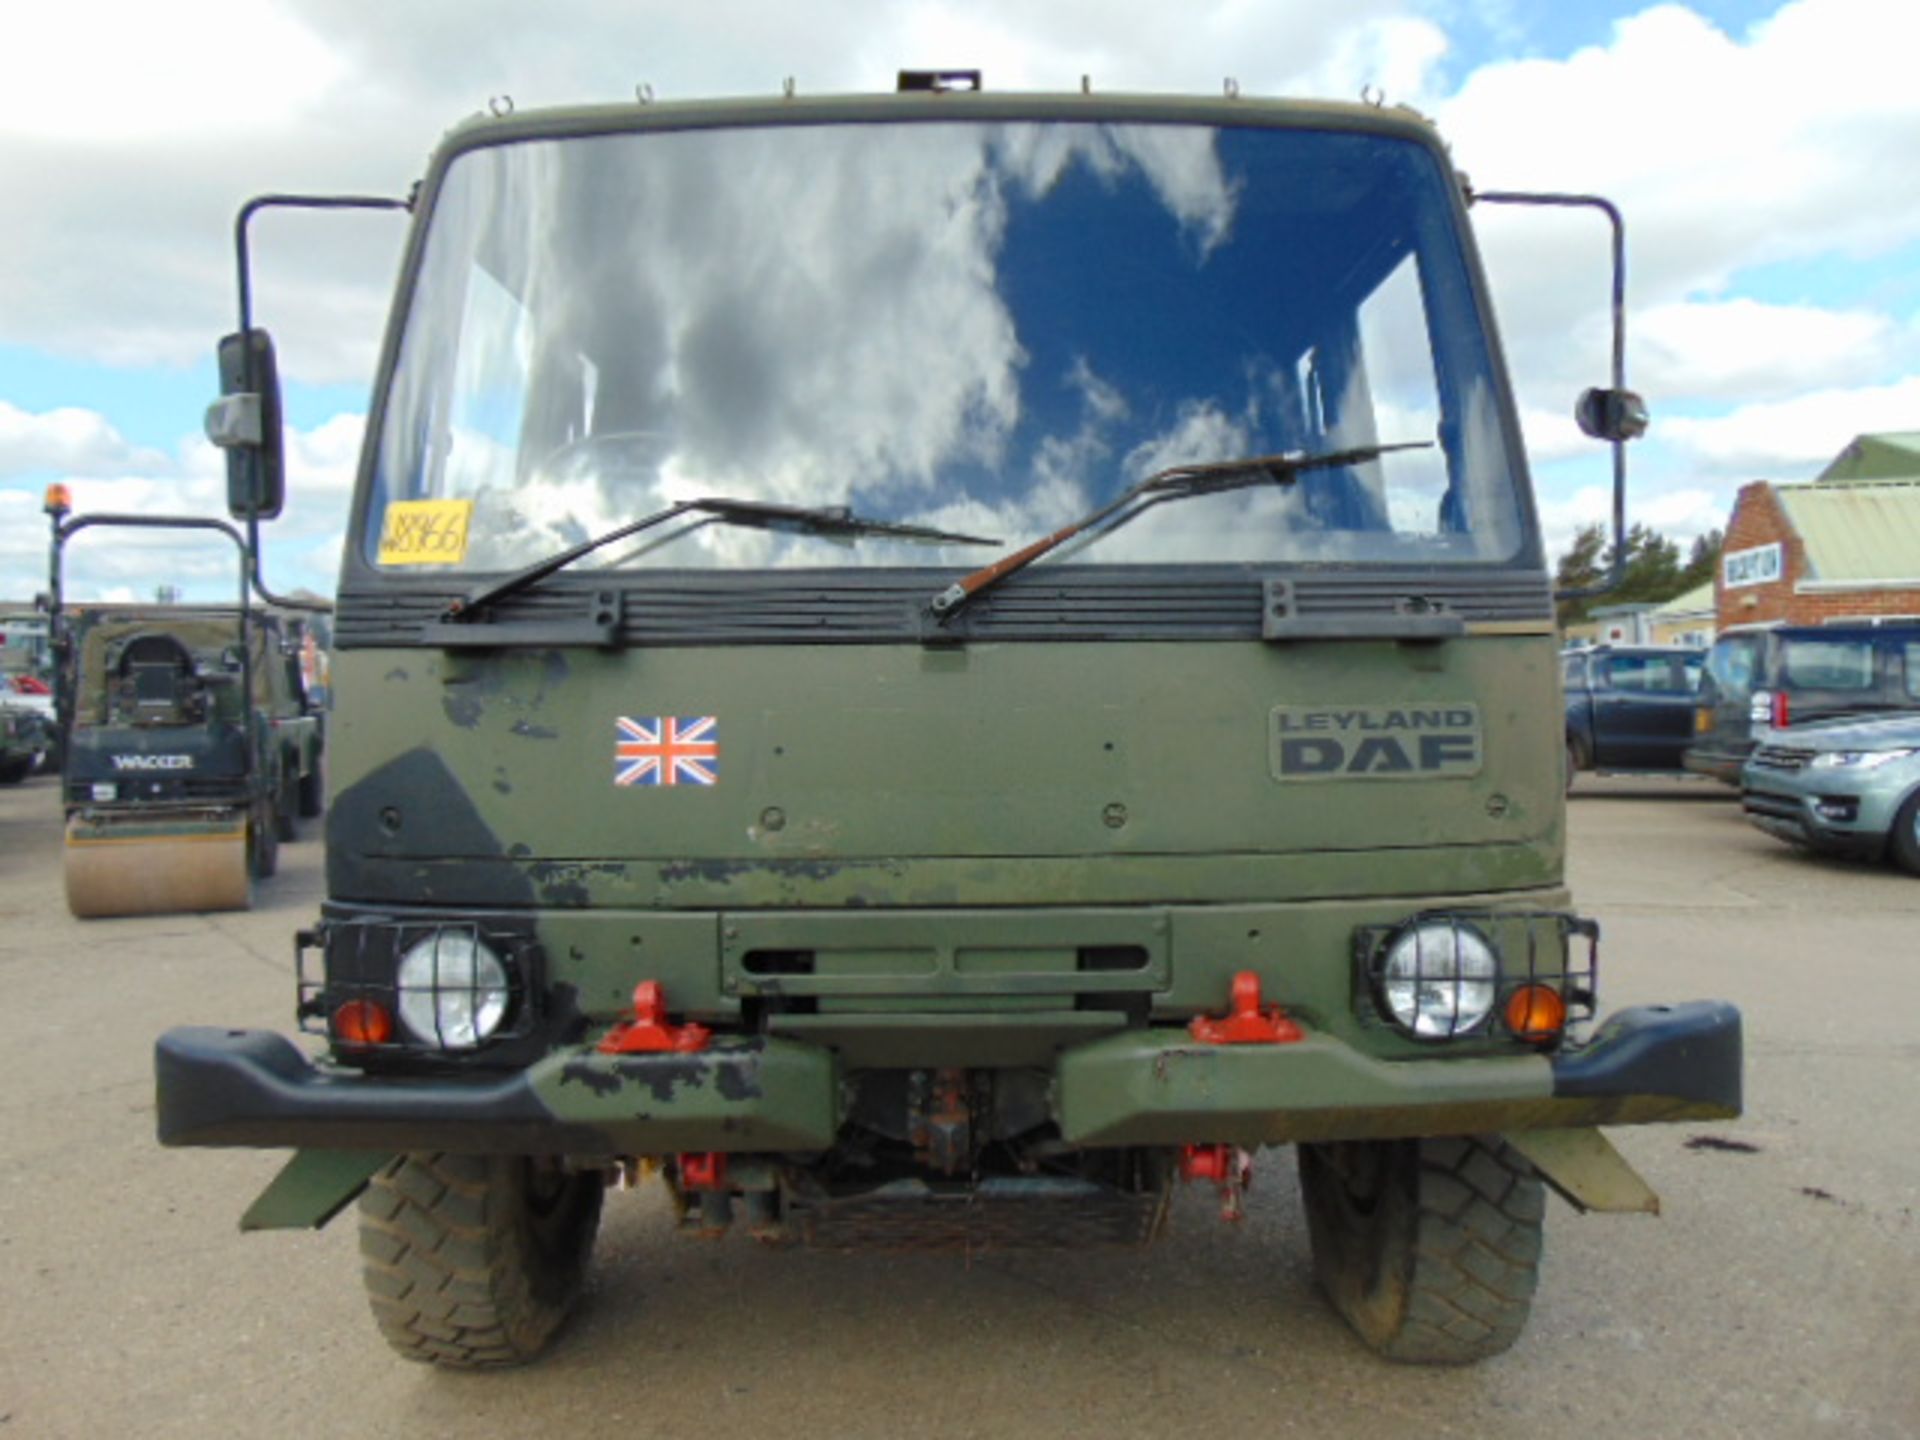 Leyland Daf 45/150 4 x 4 fitted with Hydraulic Winch ( operates Front and Rear ) - Image 2 of 24